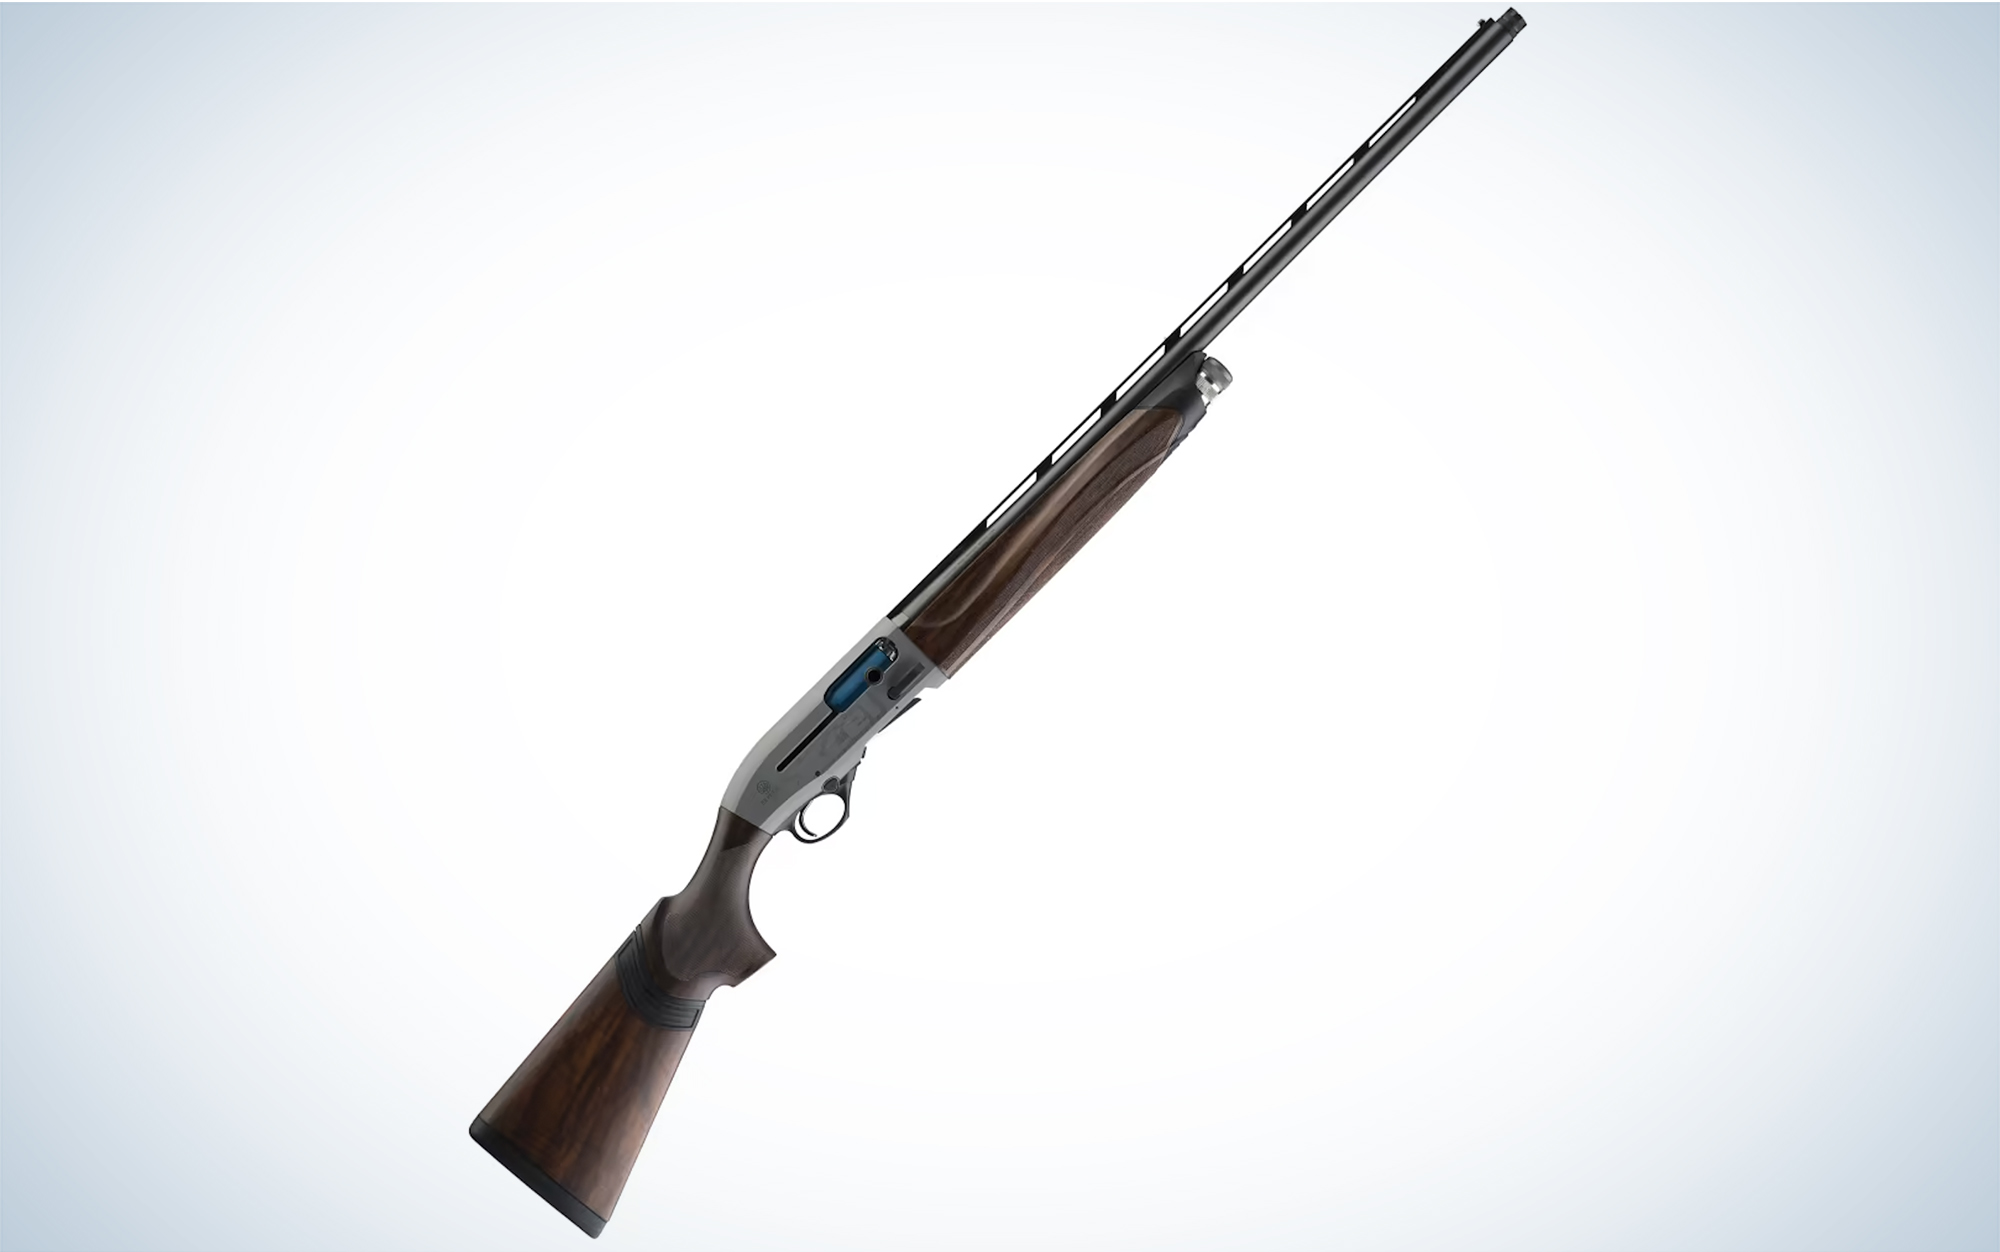 The Beretta A400 Xcel Sporting is one of the best shotguns for sporting clays.